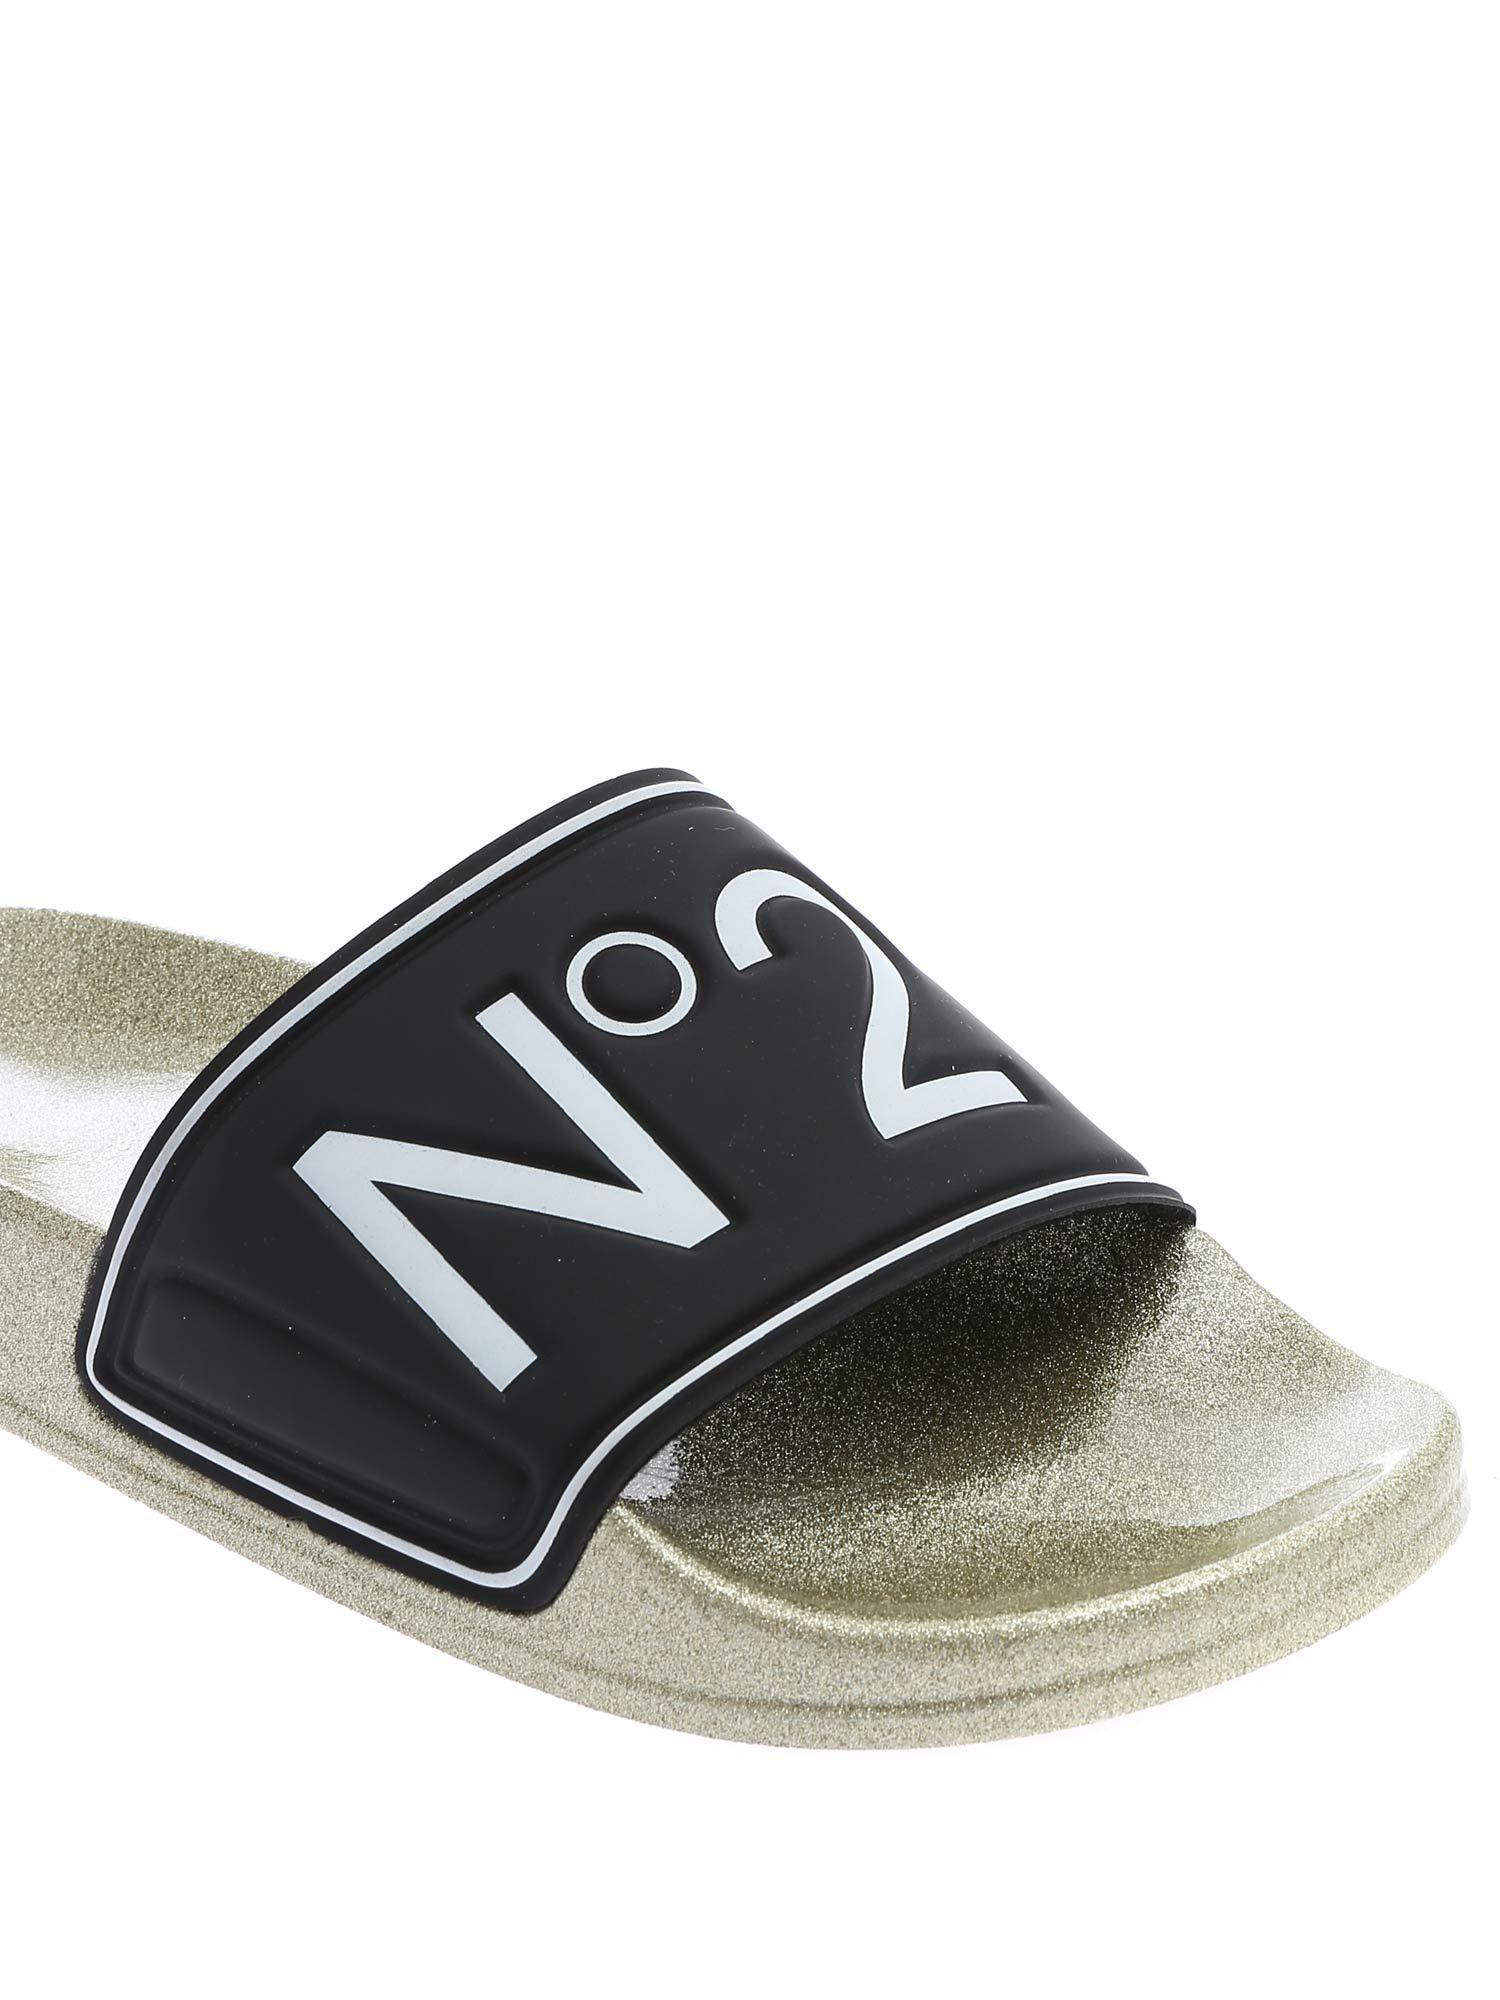 N°21 Glitter Slippers With Black Band in Black - Lyst